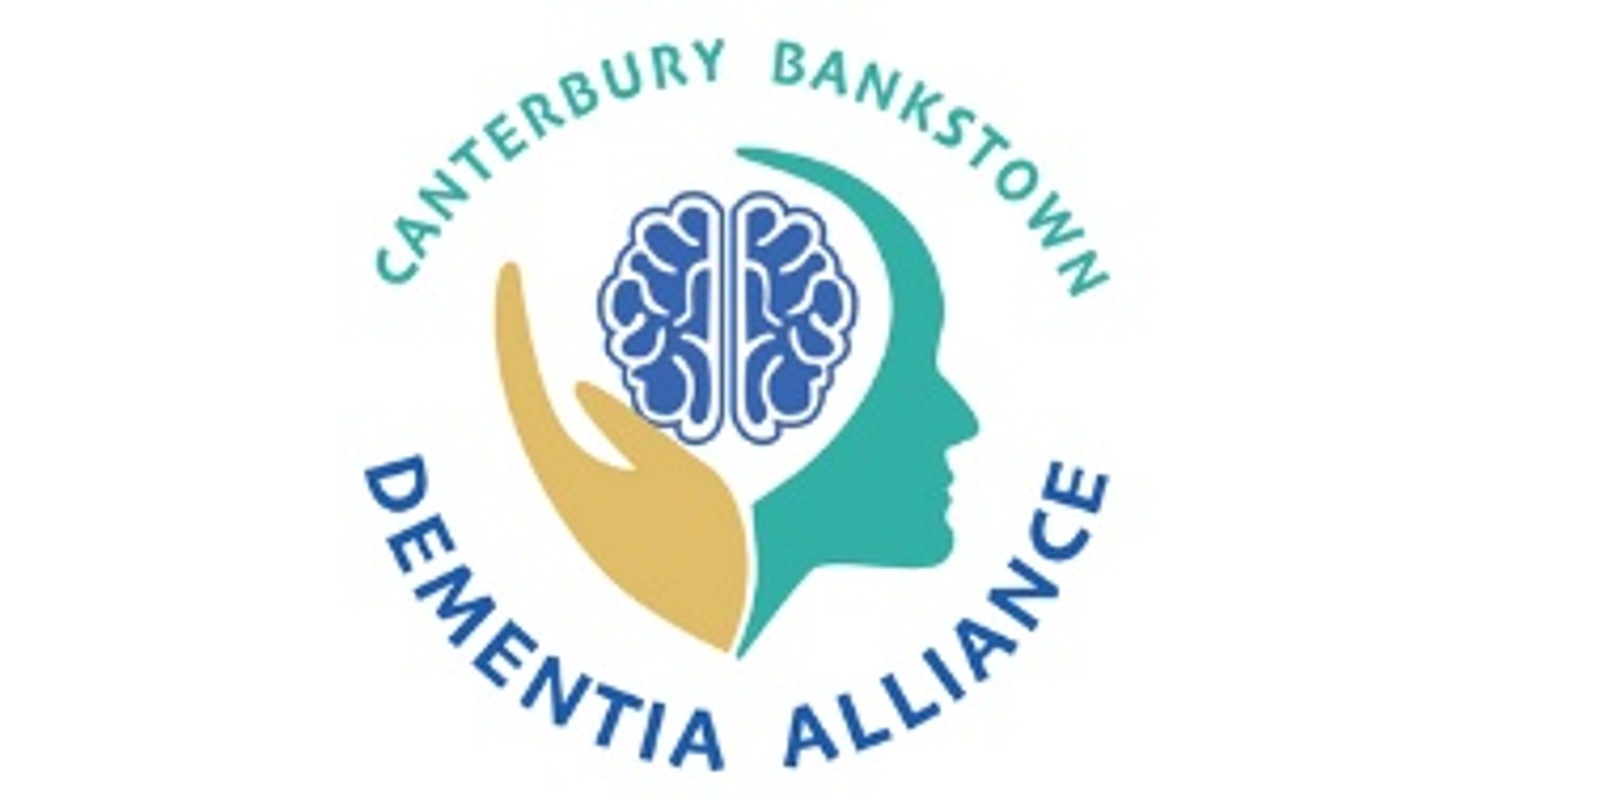 Banner image for Canterbury Bankstown: "Treasure The Moment: Dementia Risk-reduction and Wellbeing Expo 2022" - Aged Care Service Providers' EOI - registration